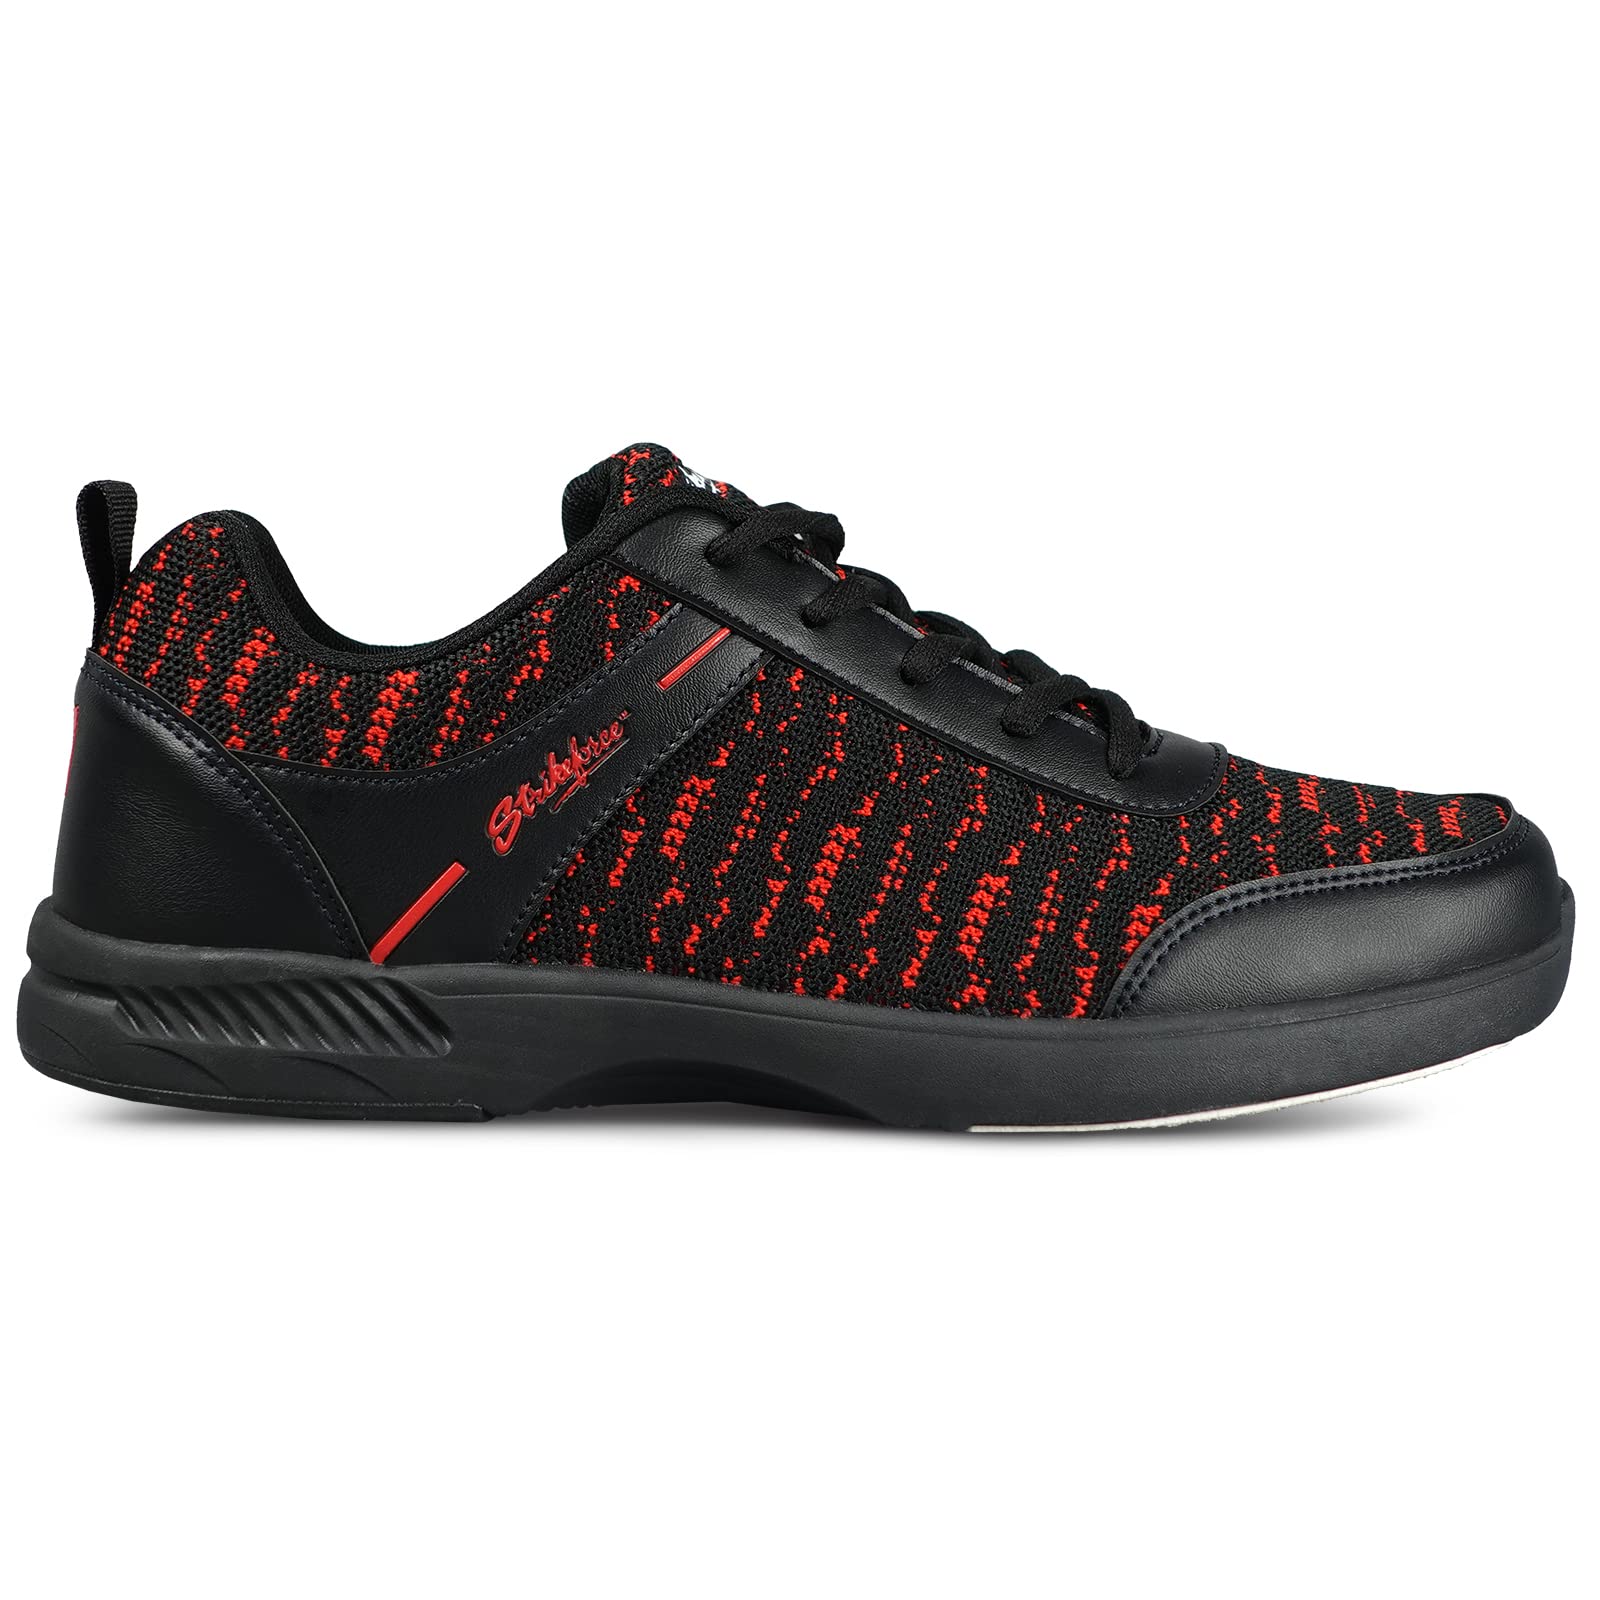 KR Strikeforce Flyer Mesh Lite Black Cardinal Medium Width Size 7 Men's Athletic Style Bowling Shoes with FlexSlide Technology for Right or Left Handed Bowlers (M-073)